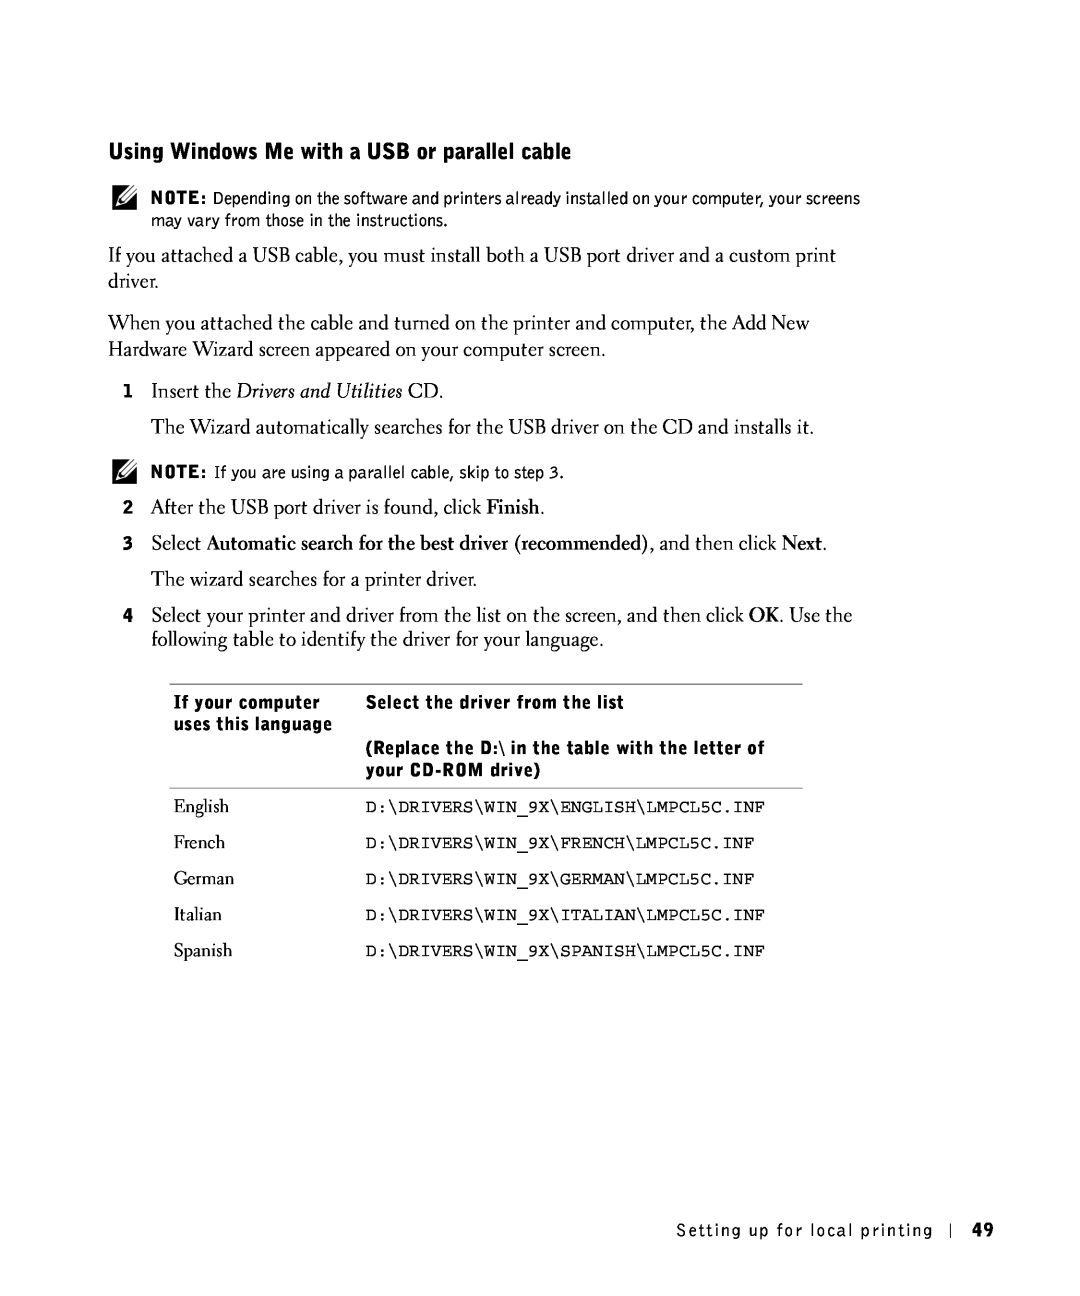 Dell S2500 owner manual Using Windows Me with a USB or parallel cable, Insert the Drivers and Utilities CD 